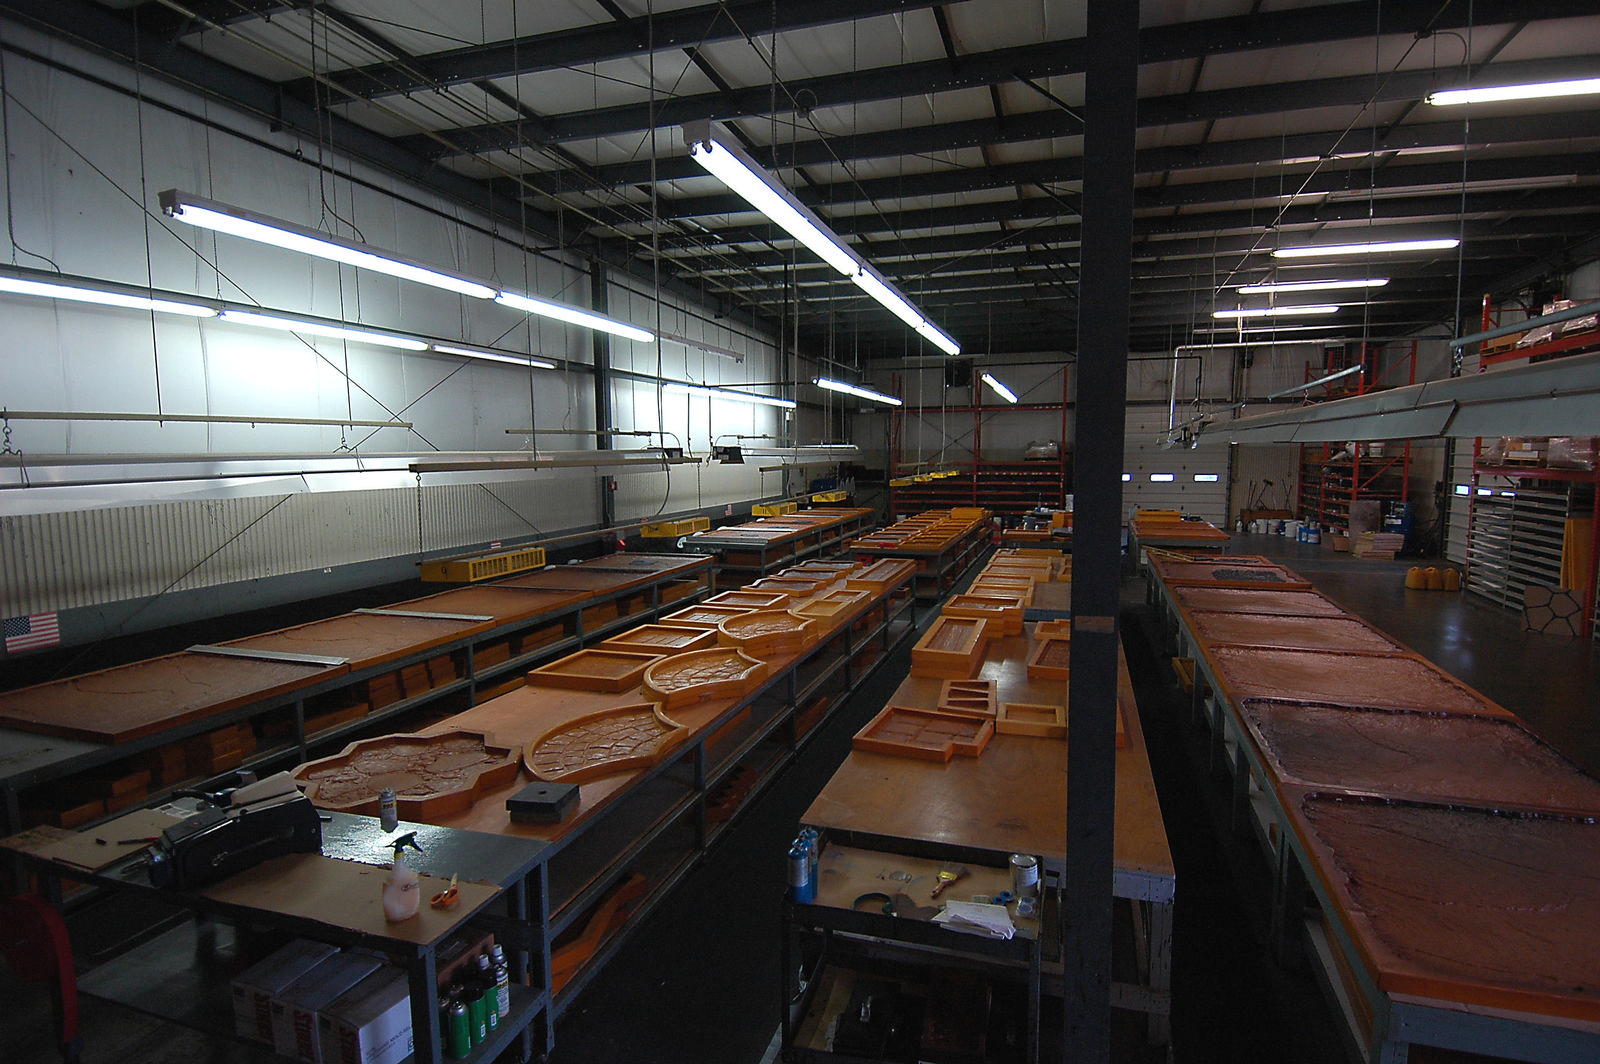 The stamping tool manufacturing area at Stampcrete Internationals headquarters in Liverpool, New York